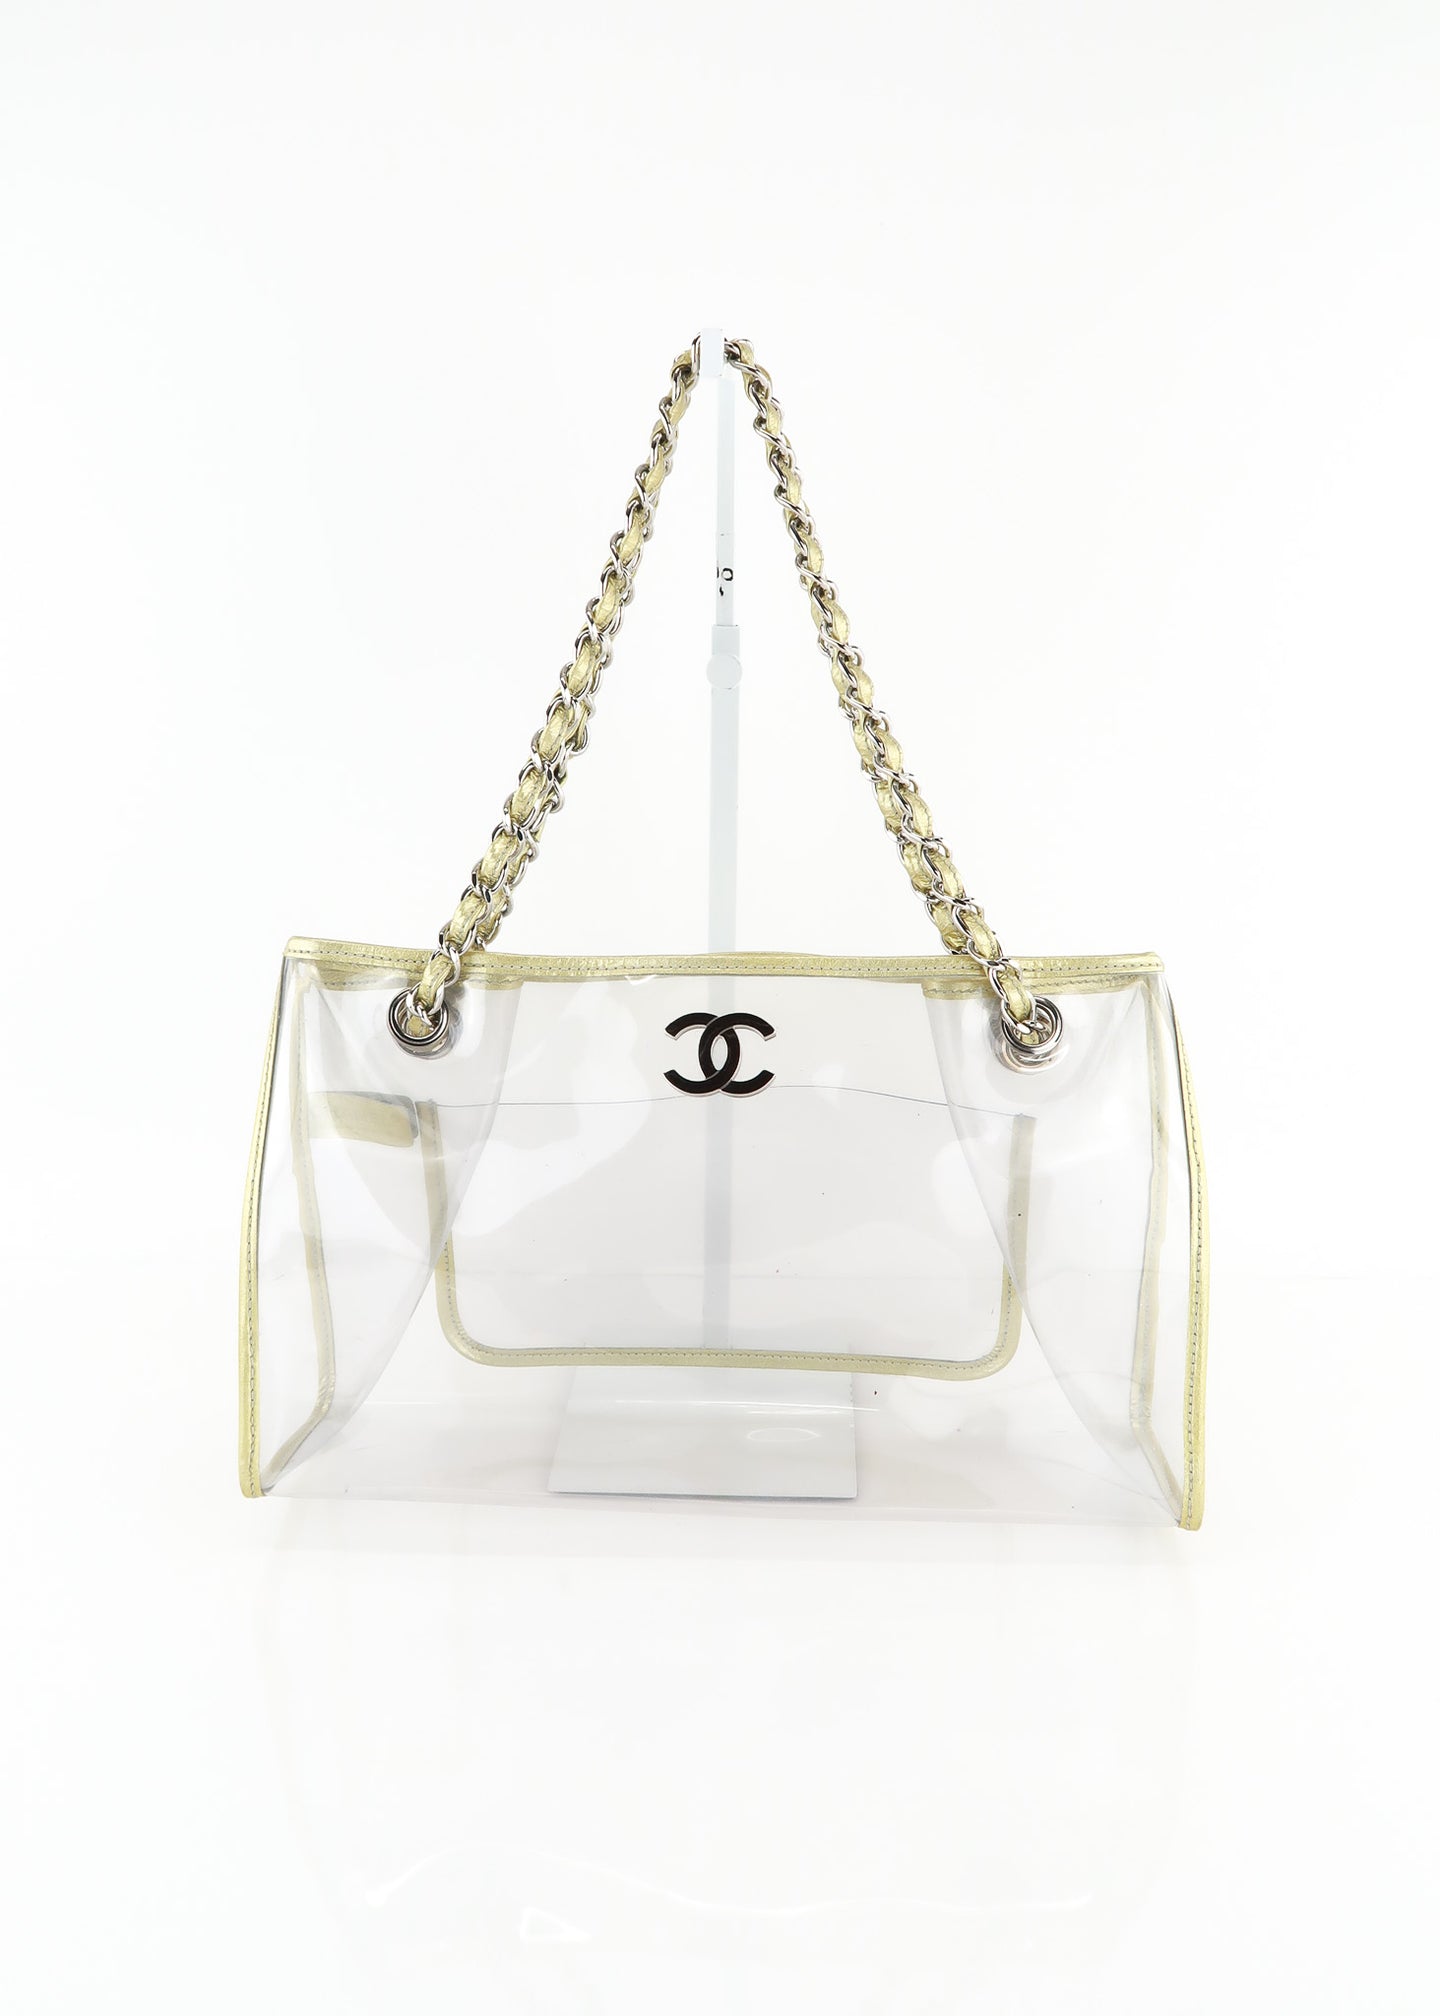 chanel clear plastic bags